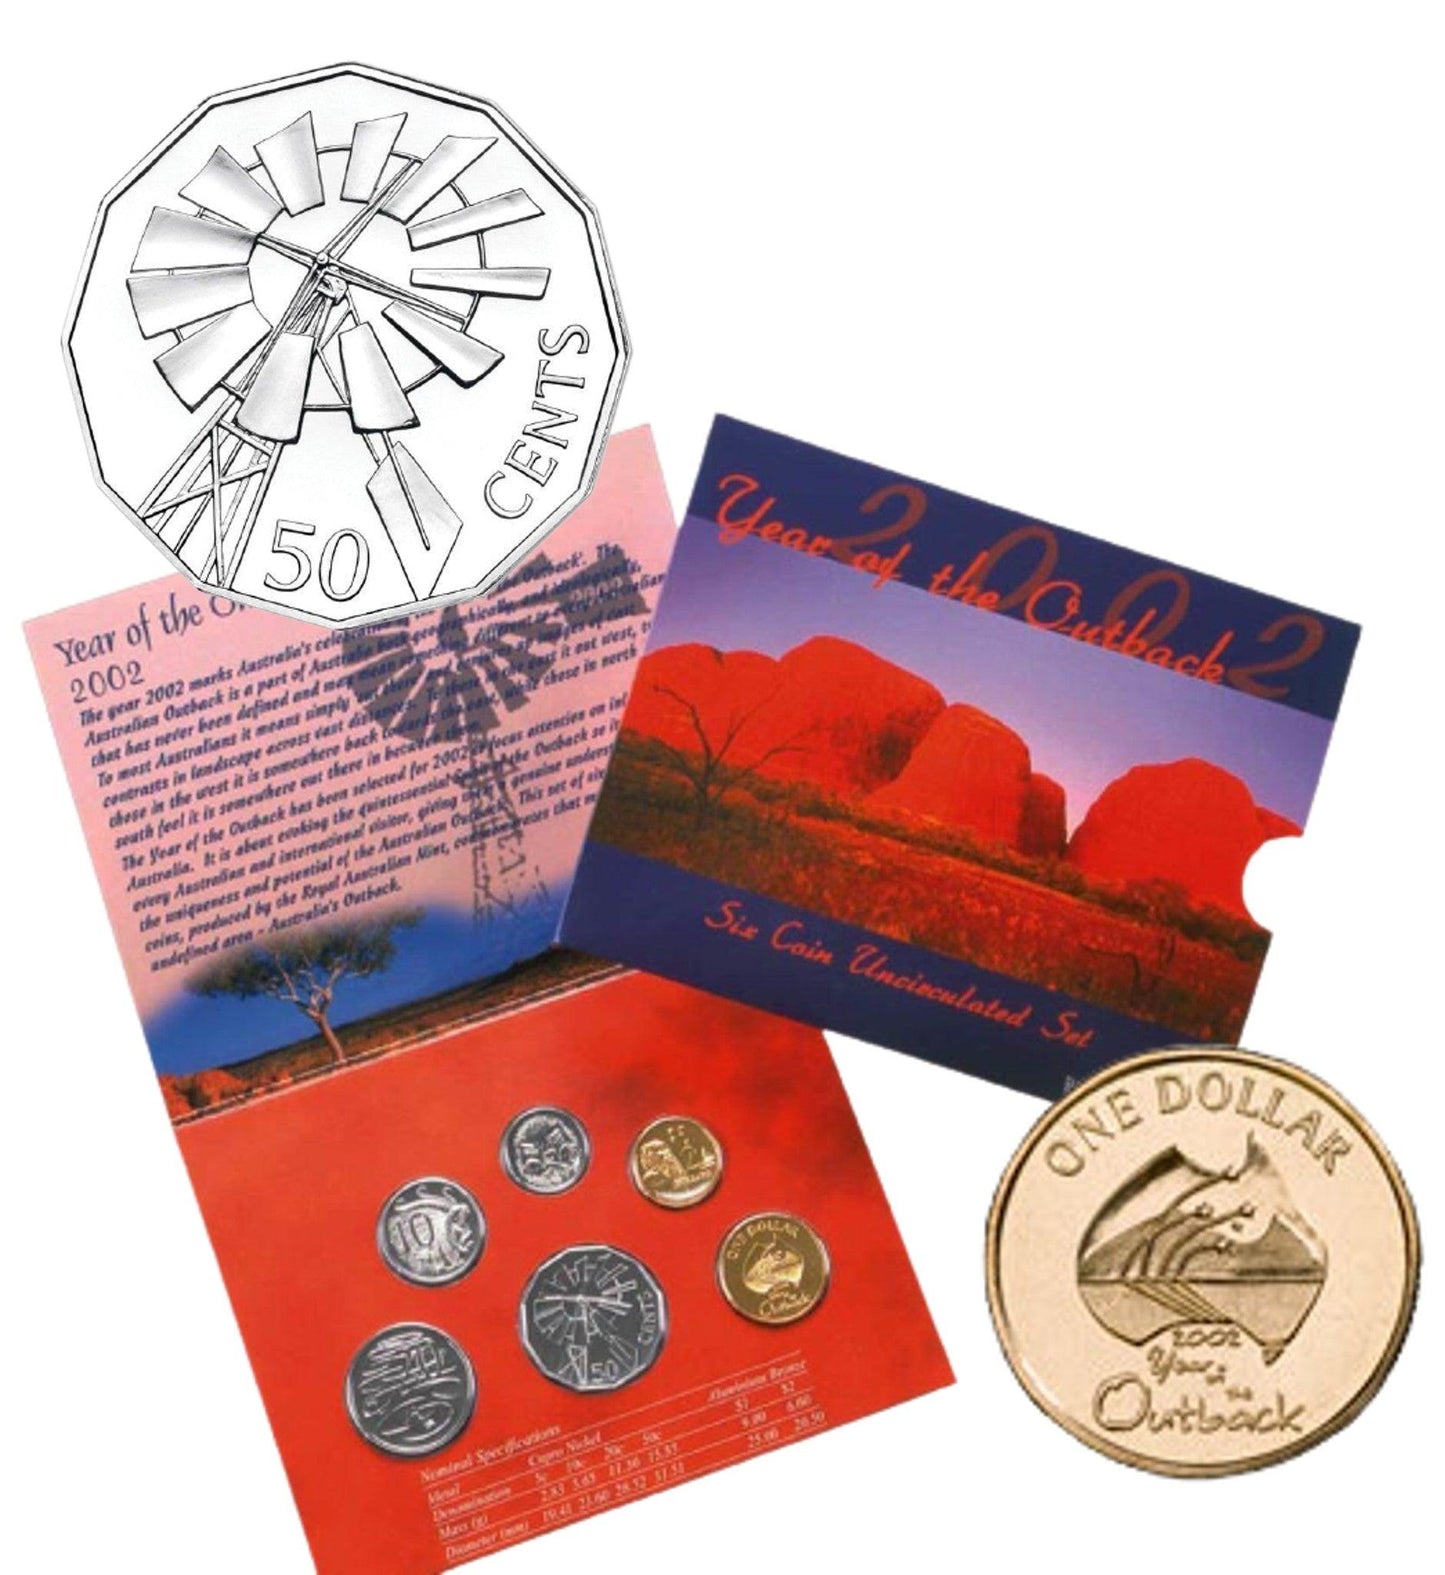 2002 Royal Australian Mint Uncirculated 6 Coin Set - Year of the Outback - Loose Change Coins